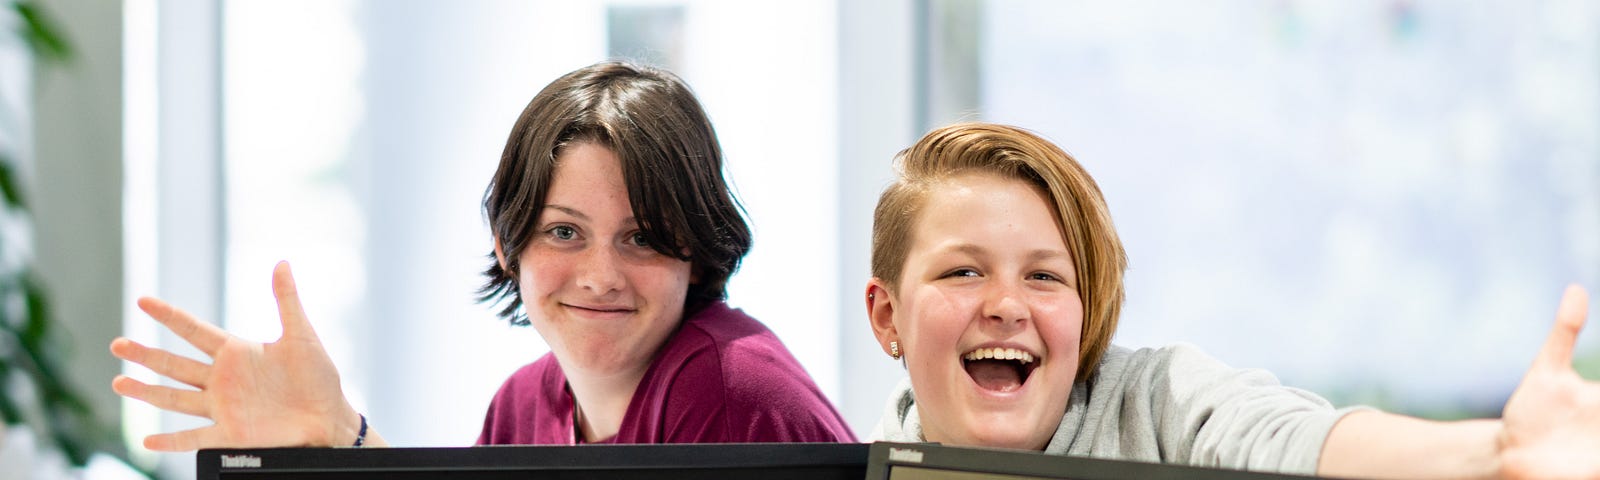 Two young people with their hands out smiling behind two laptop monitors